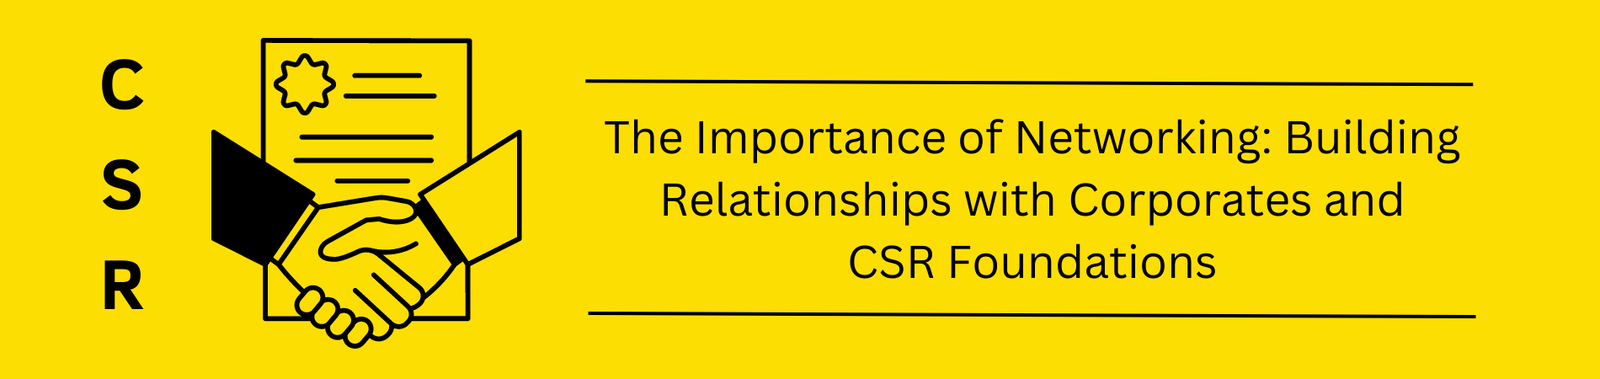 The Importance of Networking: Building Relationships with Corporates and CSR Foundations